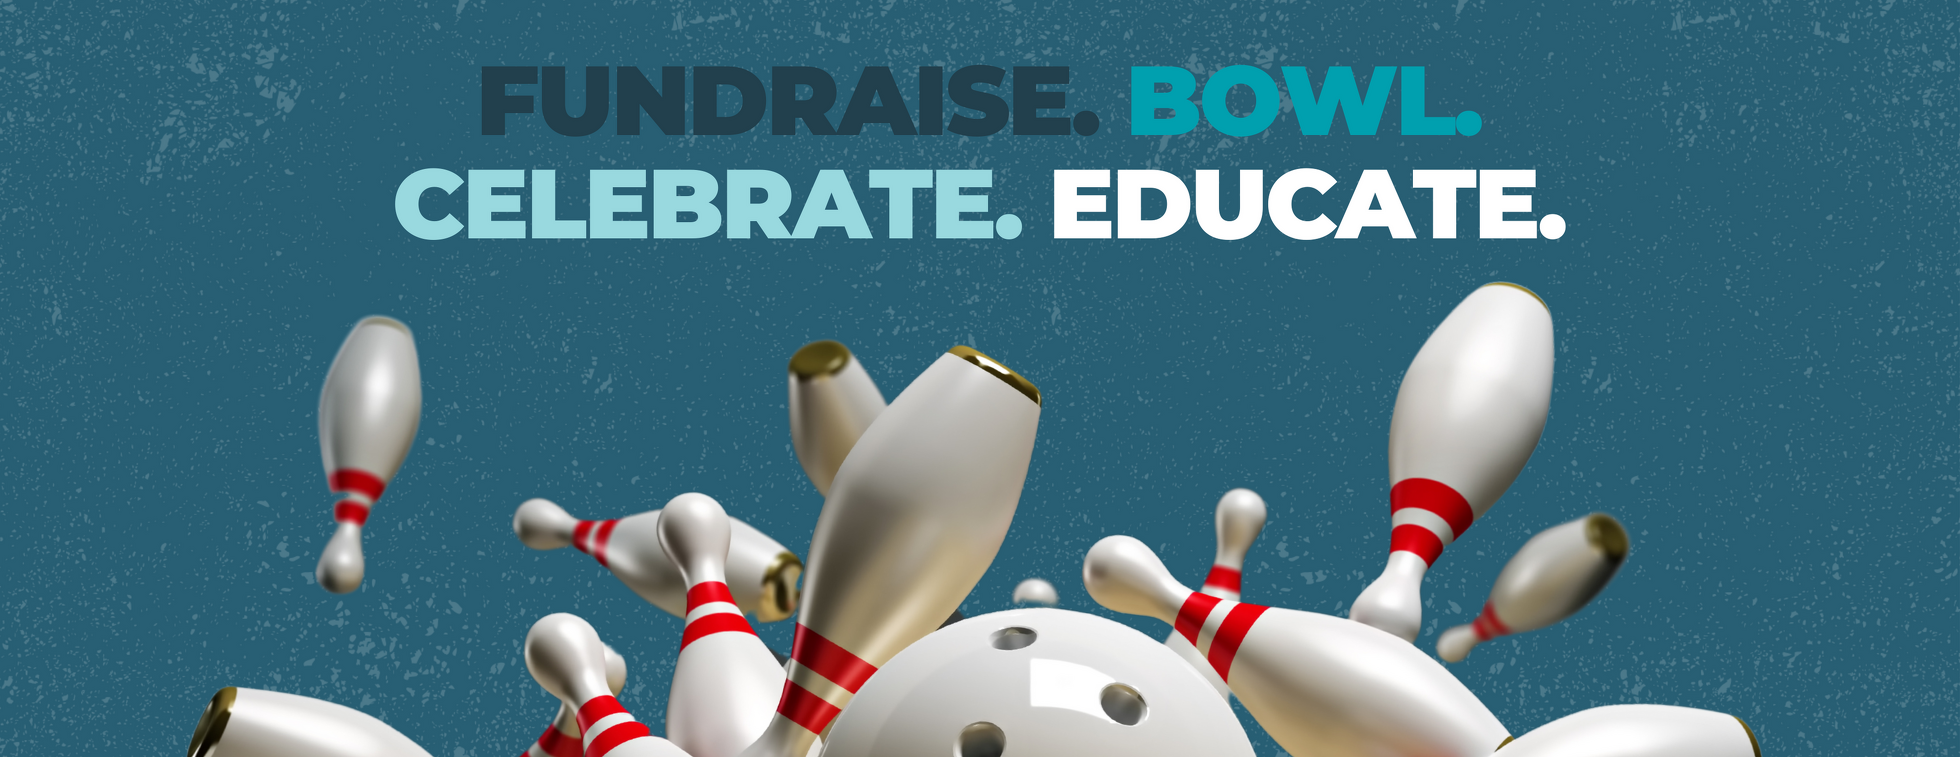 JA Erie County's Annual Bowl-A-Thon presented by Wabtec